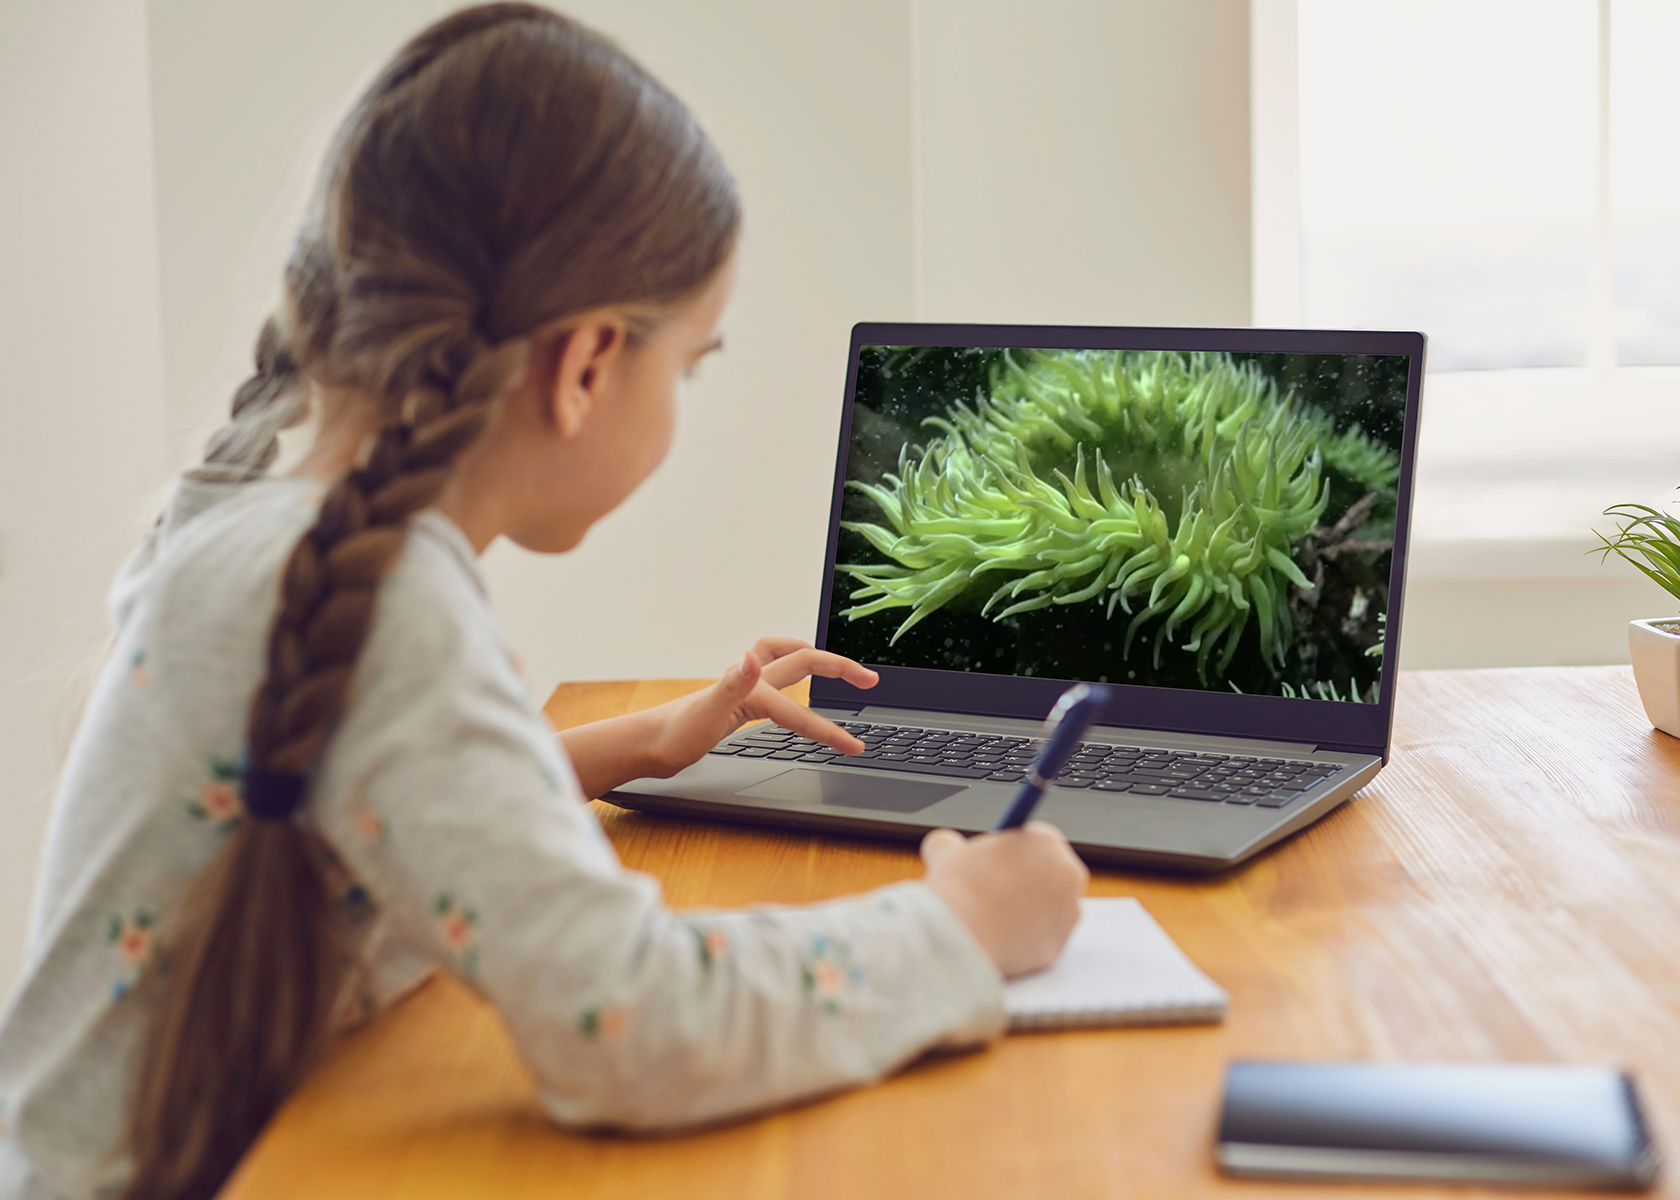 A young girl looks at a laptop screen showing an image of a sea anemone